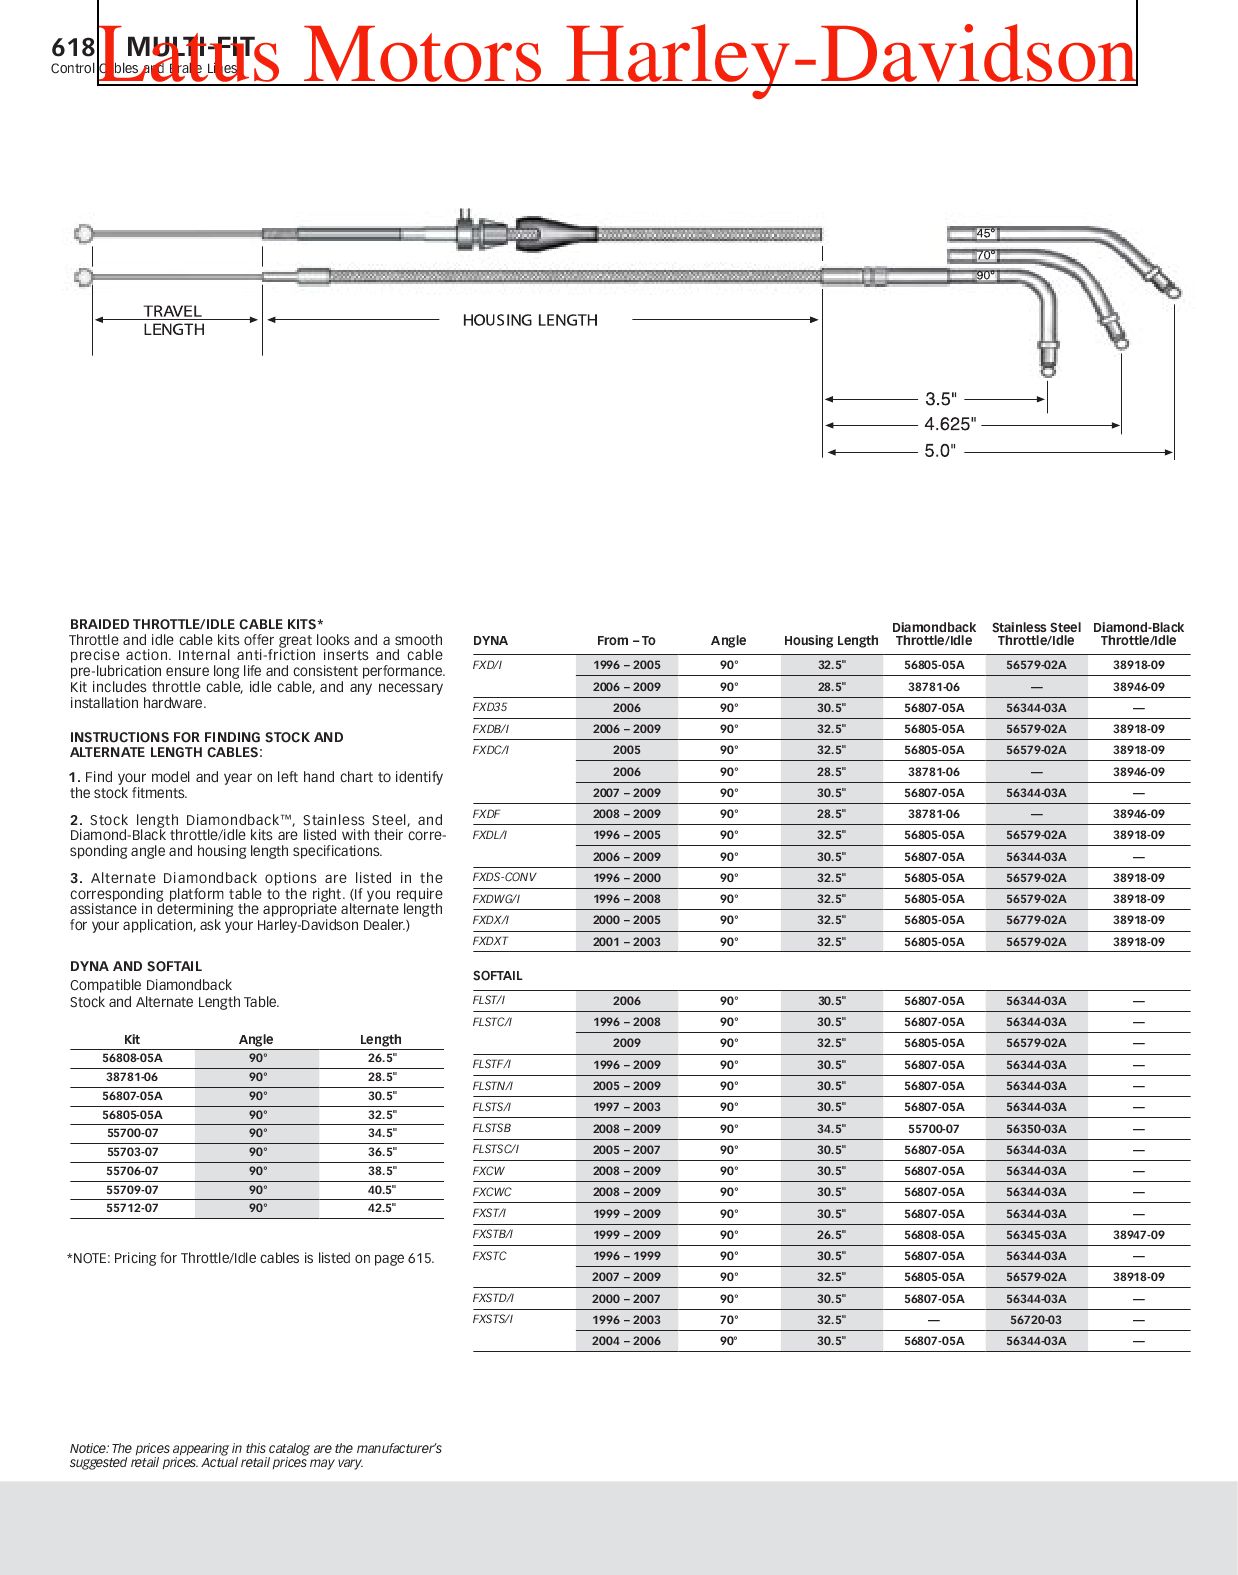 Harley Davidson Throttle Cable Length Chart